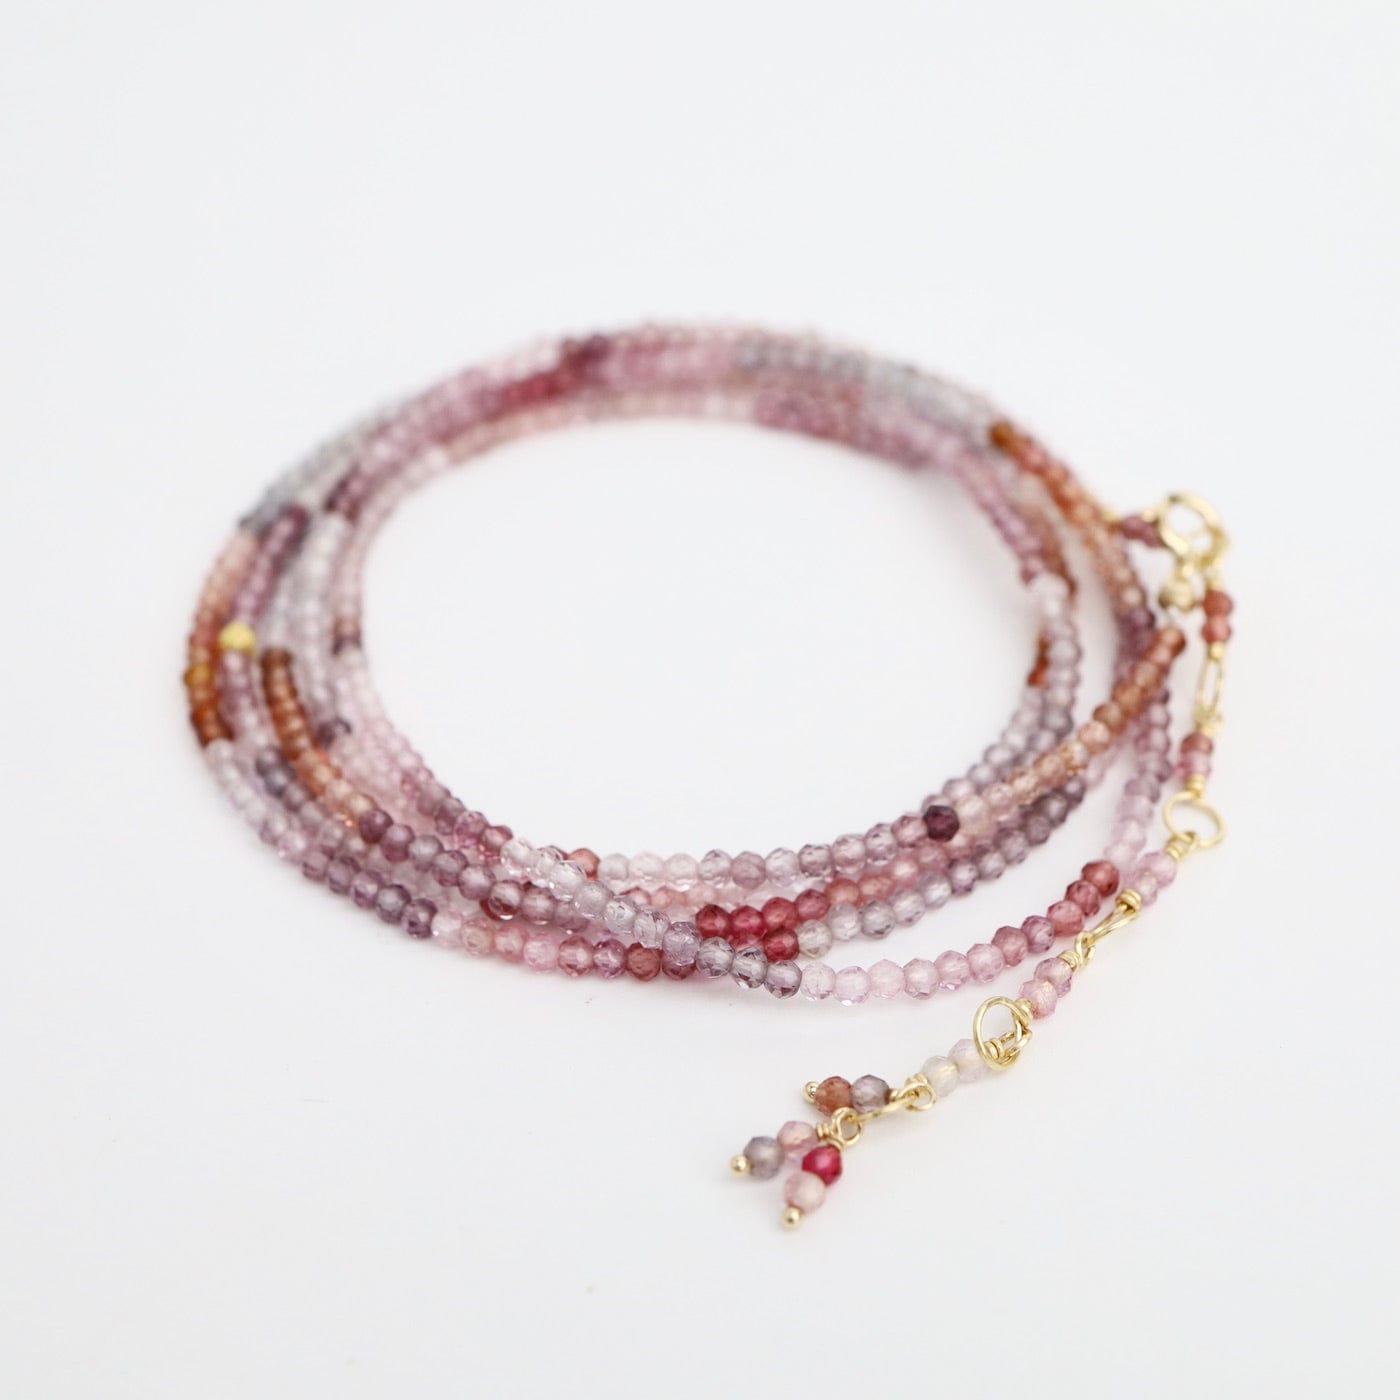 BRC-18K Multicolored Spinel Wrap Bracelet & Necklace with 18k Hex Bead